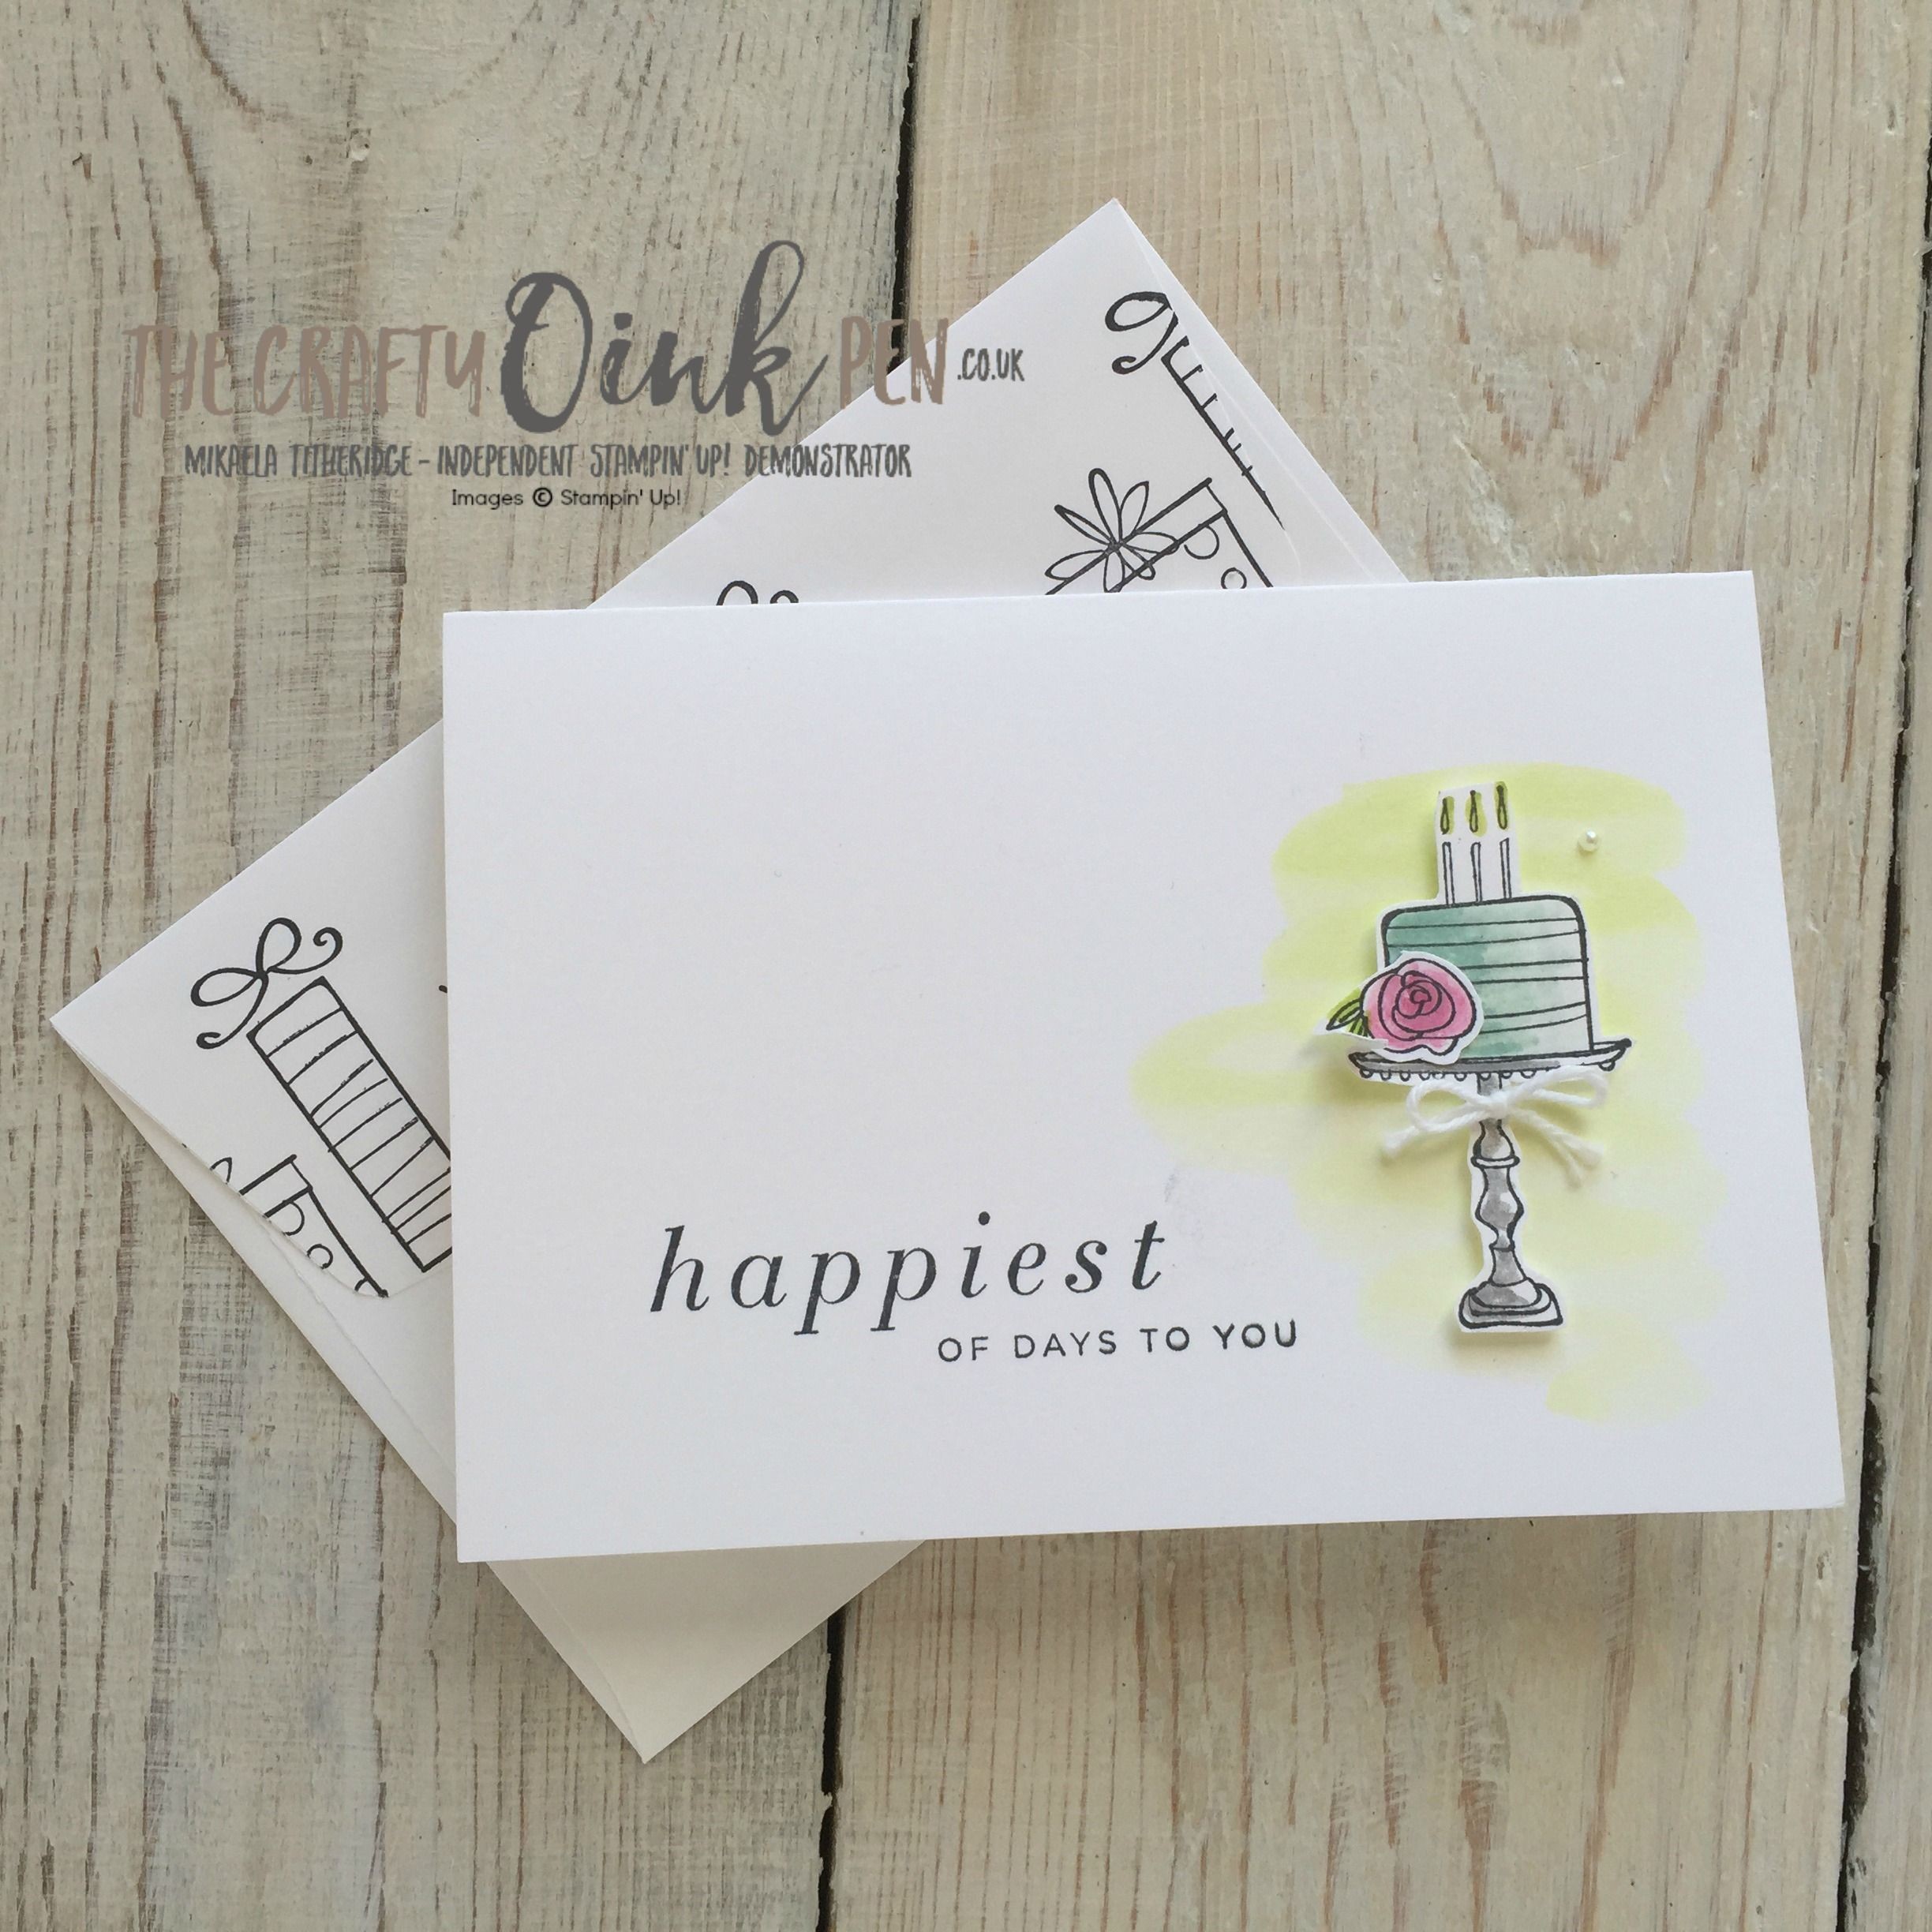 Wedding Papercraft Quick and Easy Stamping On the Happiest Of Days with Mikaela